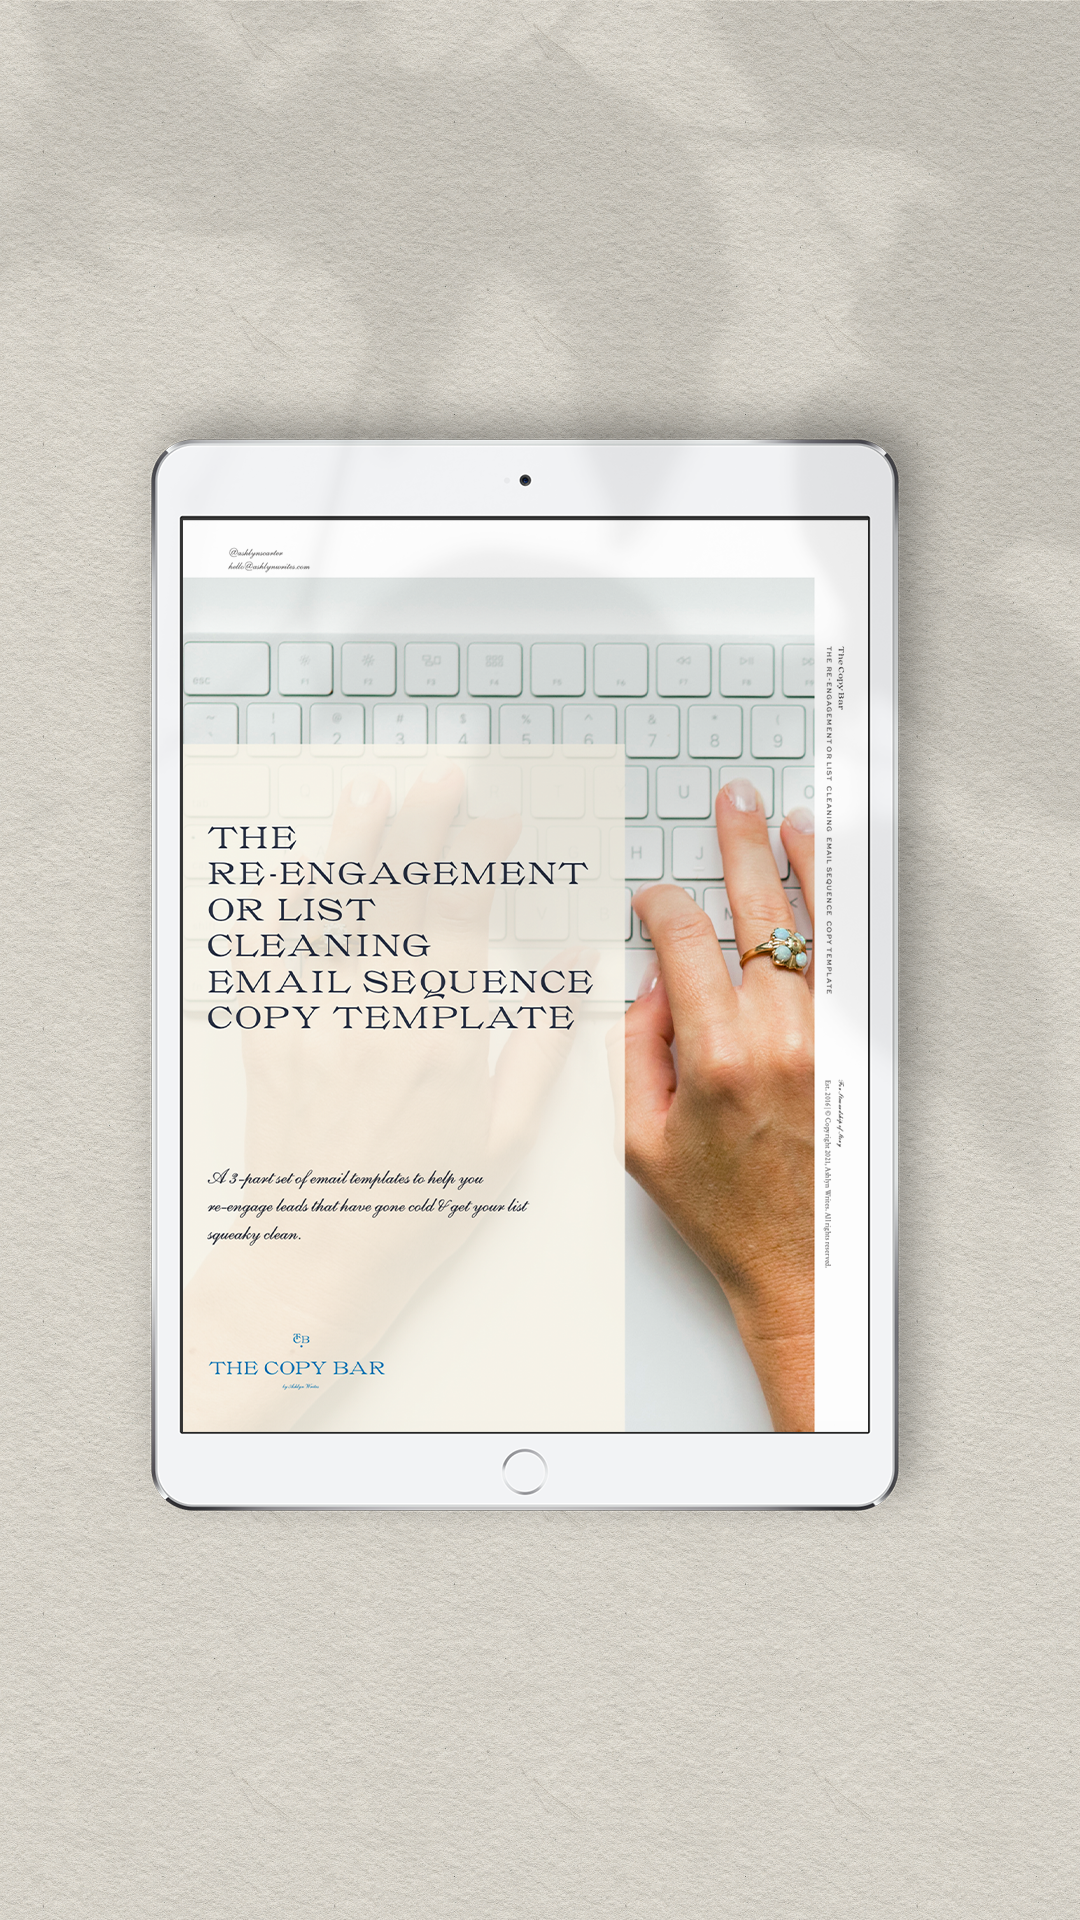 The Re-Engagement or List Cleaning Email Sequence Copy Template